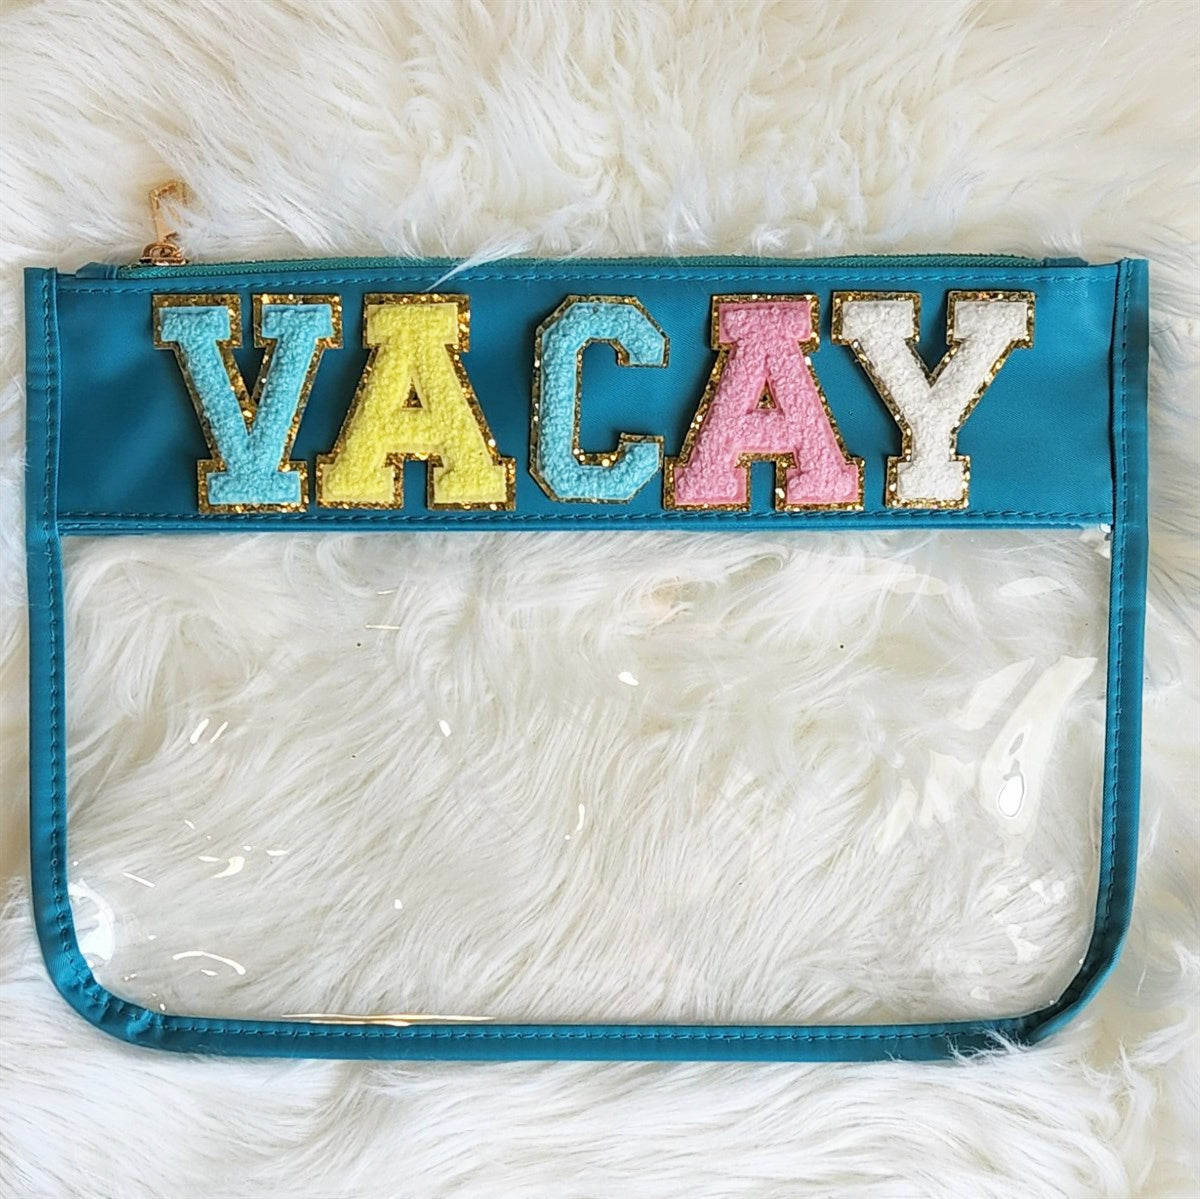 Varsity Letter Pouch | Travel Makeup Mama Organizer